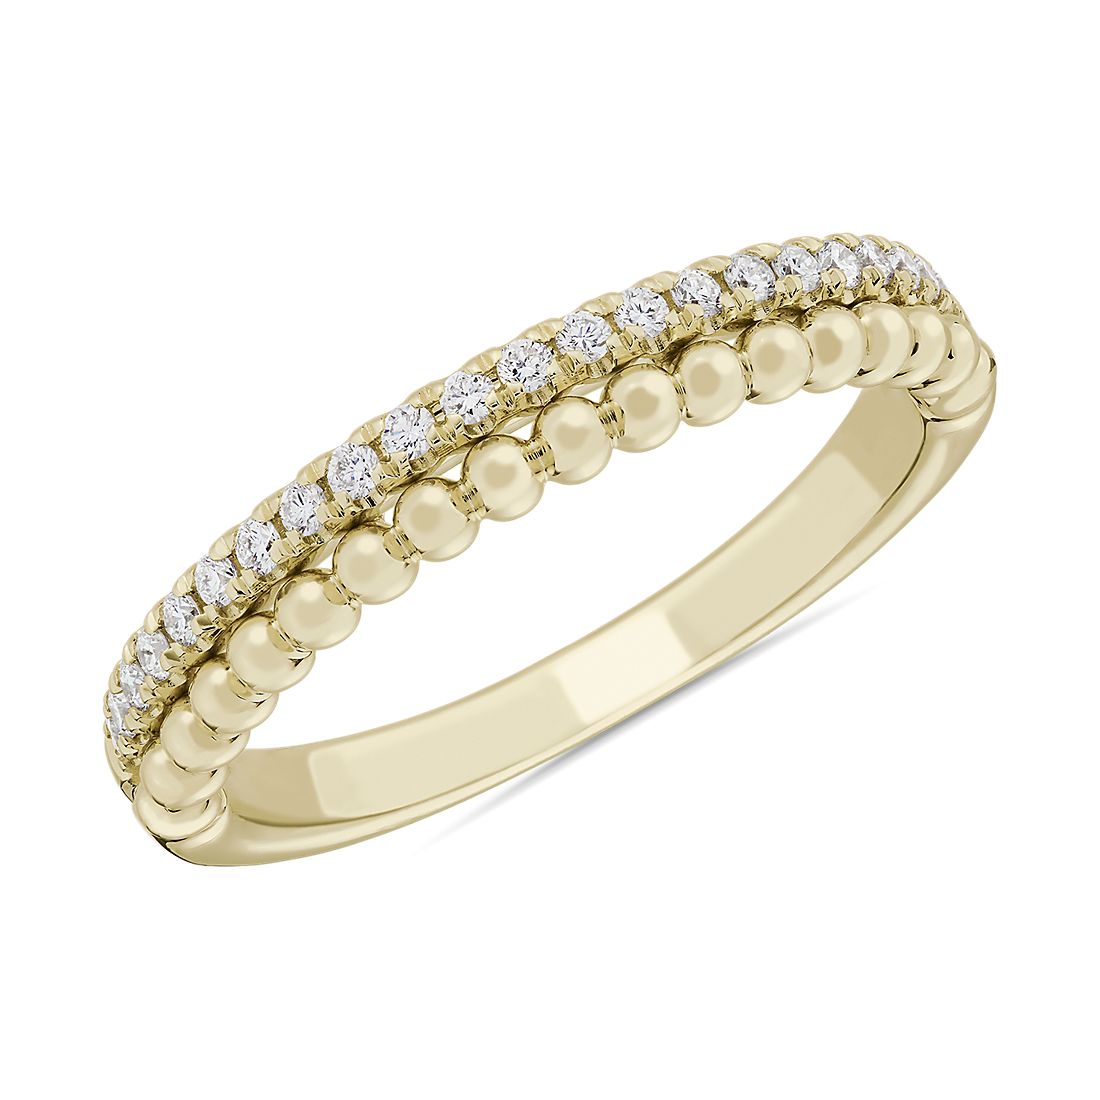 Double row ring with diamonds and gold beads.